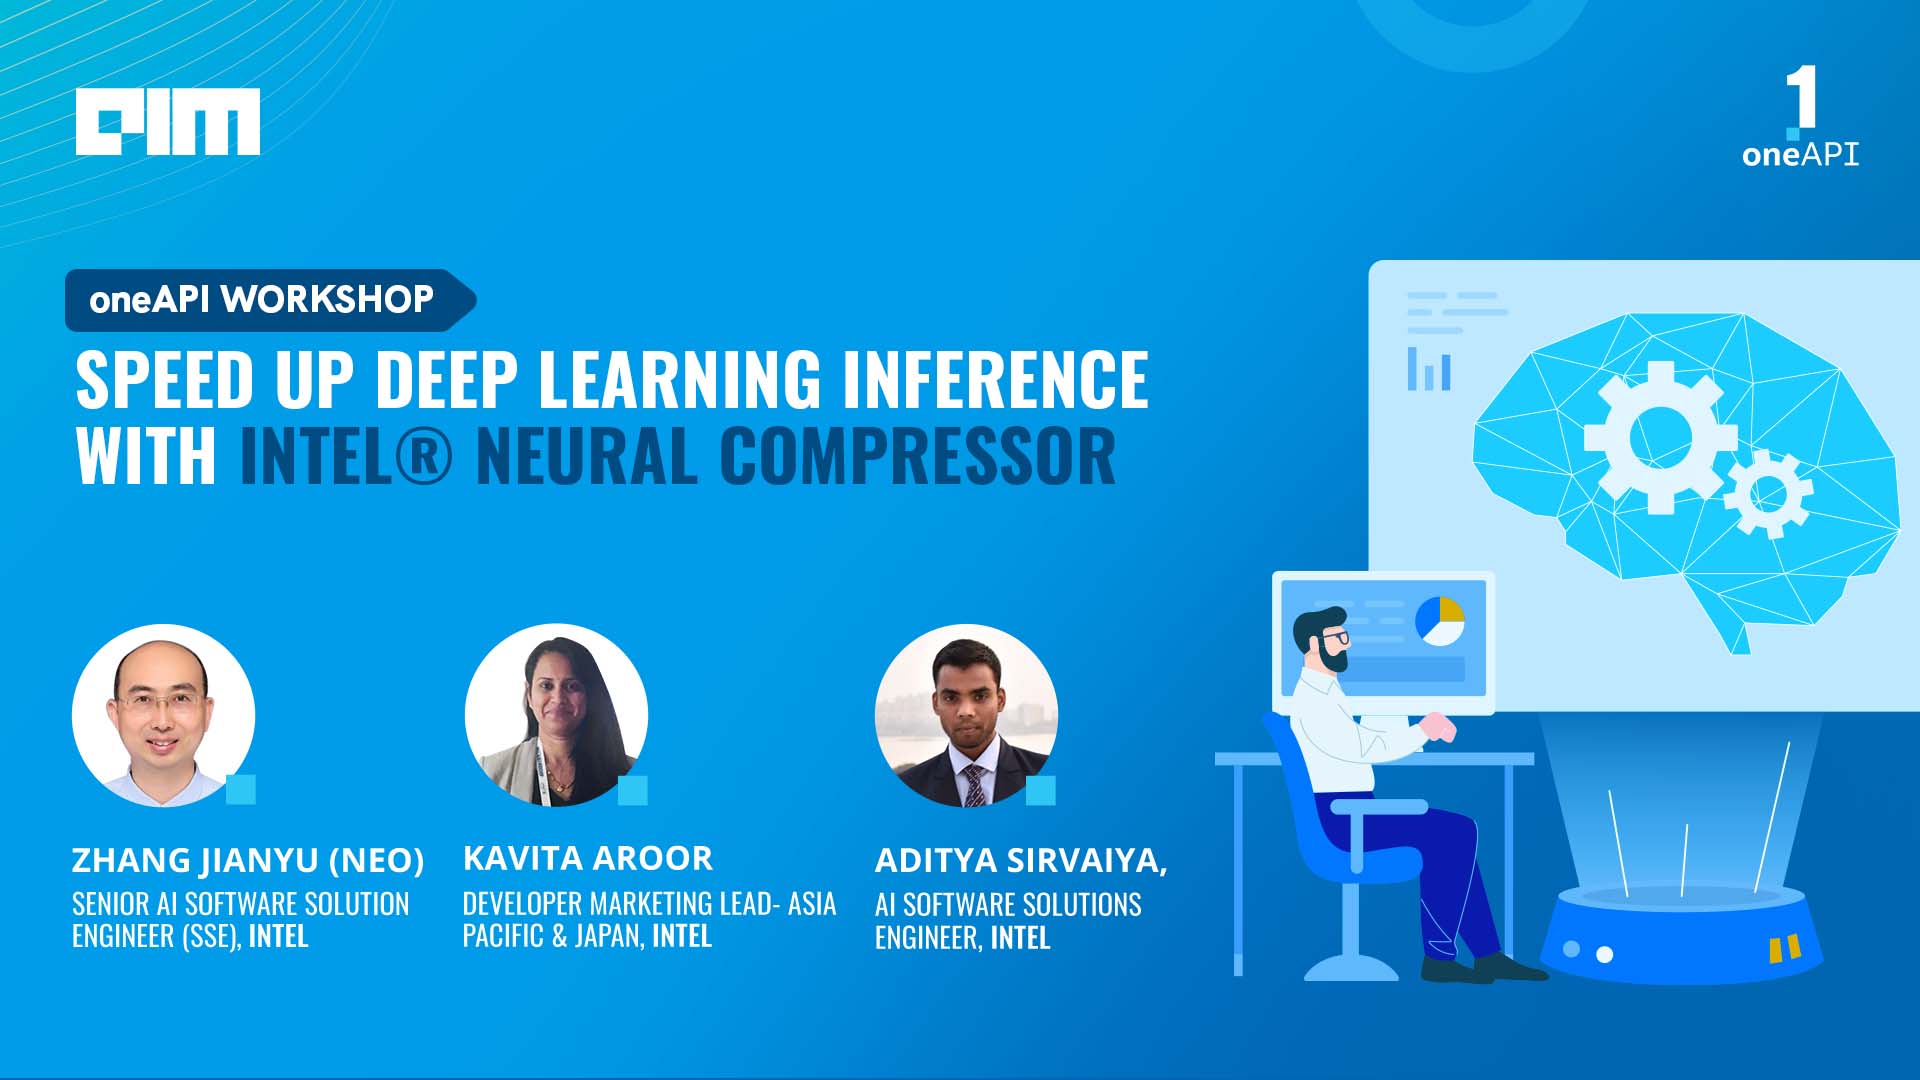 It's a wrap! Intel® oneAPI masterclass on Neural Compressor to accelerate deep learning inference